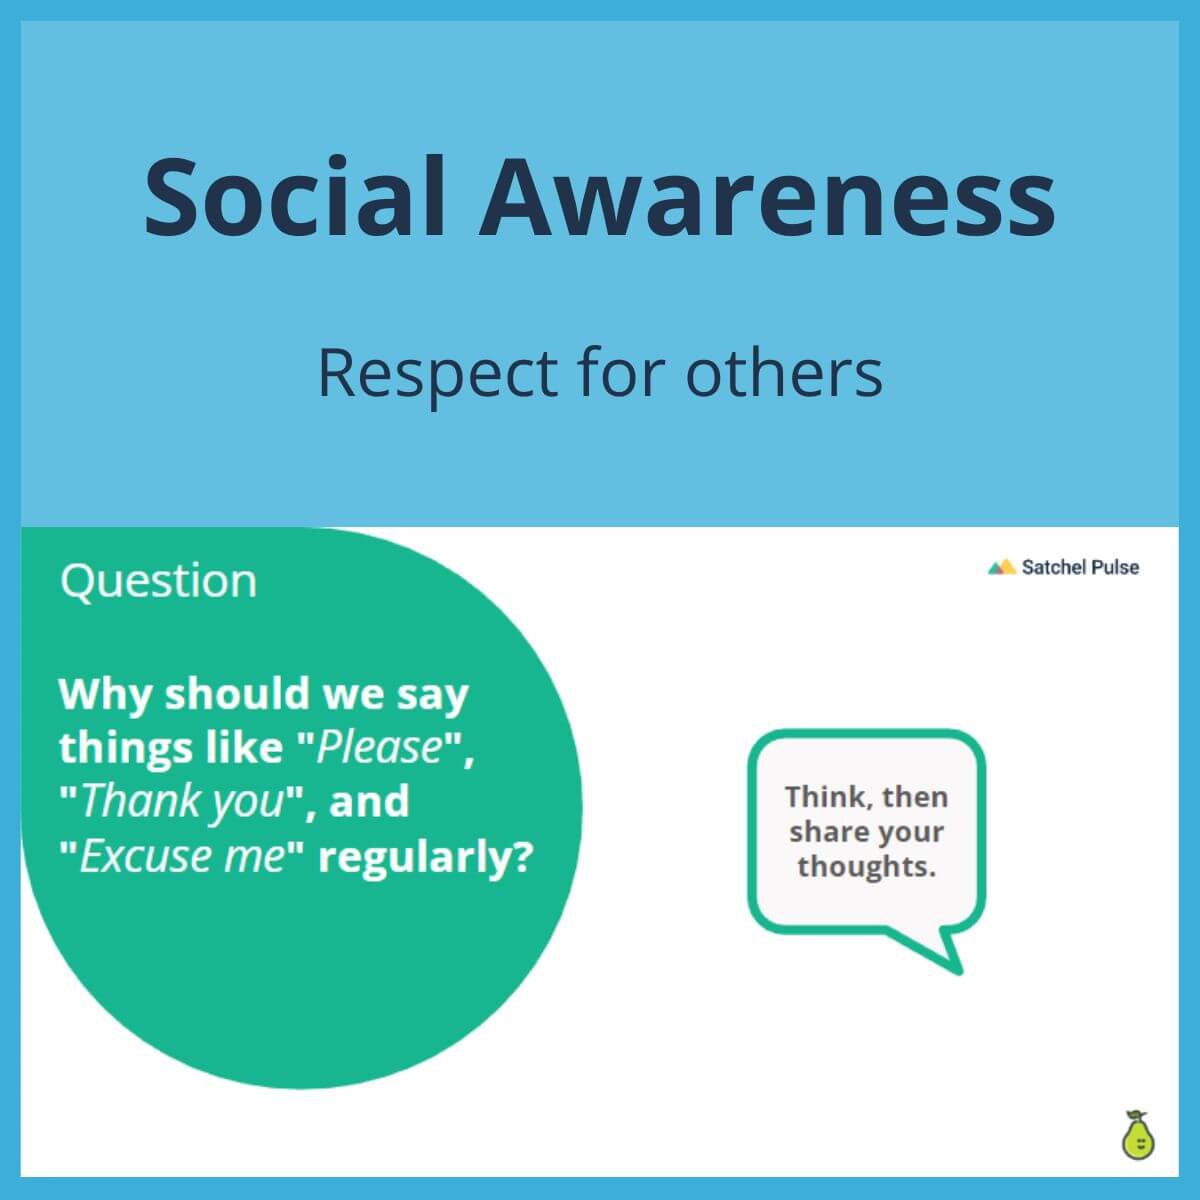 SEL Lesson focusing on Respect for Others to use in your classroom as one of your SEL activities for Social Awareness